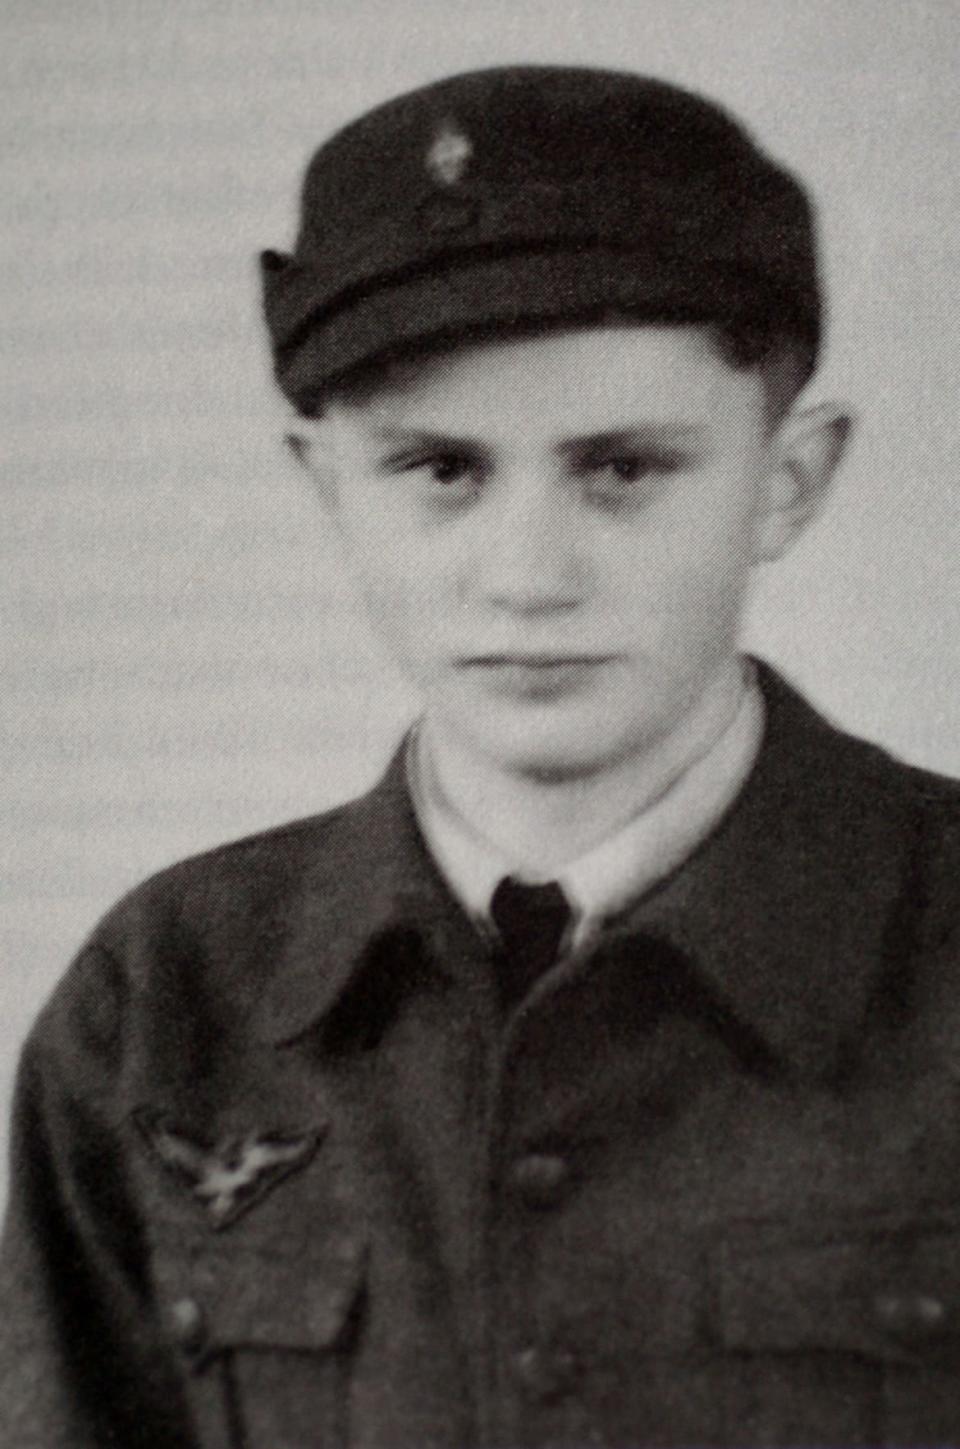 <div class="inline-image__caption"><p>Joseph Ratzinger as a German Air Force assistant in 1943. Ratzinger was elected pope April 19, 2005 and took the name Benedict XVI. </p></div> <div class="inline-image__credit">German Catholic News Agency KNA via Getty Images</div>